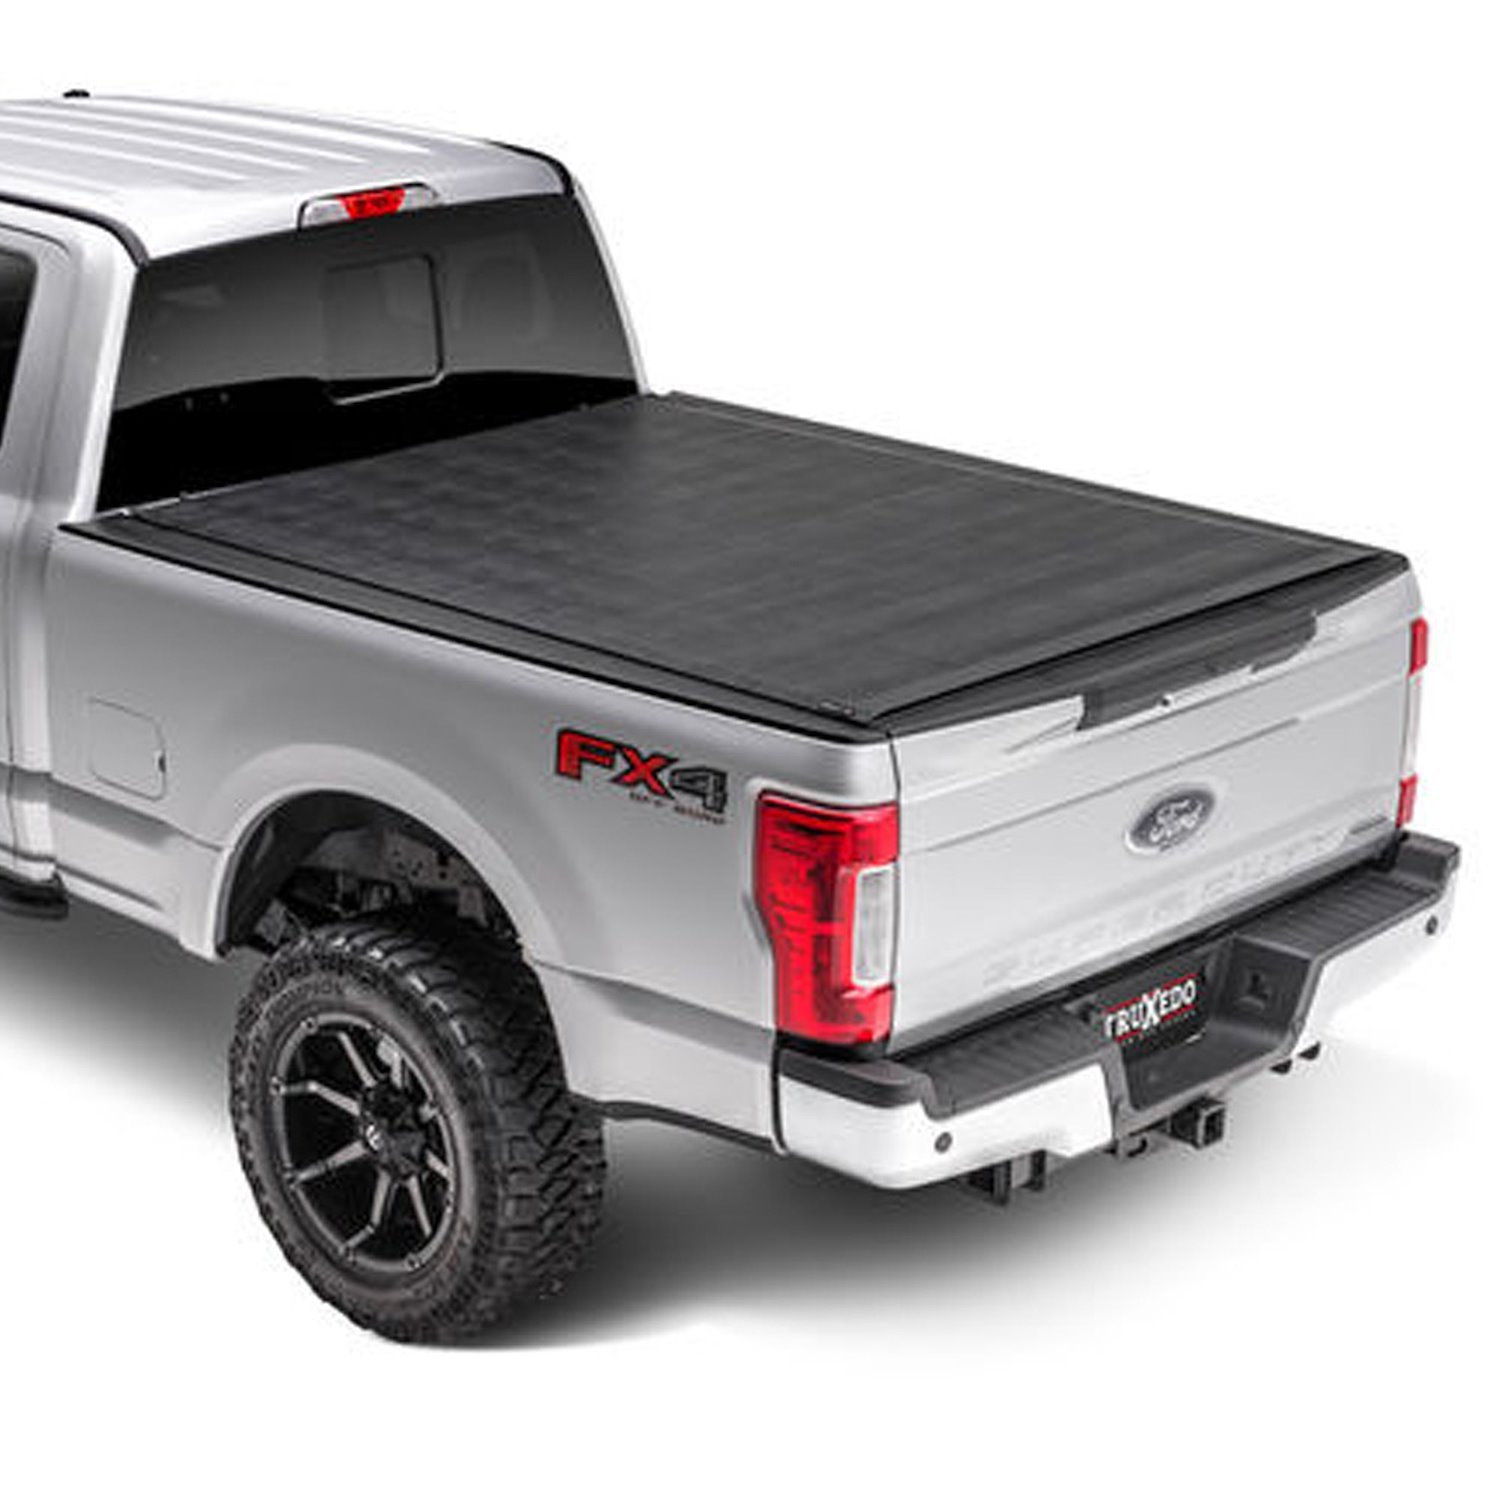 Sentry Hard Roll-Up Truck Bed Cover for 2020 Jeep Gladiator JT Truck 4-Door